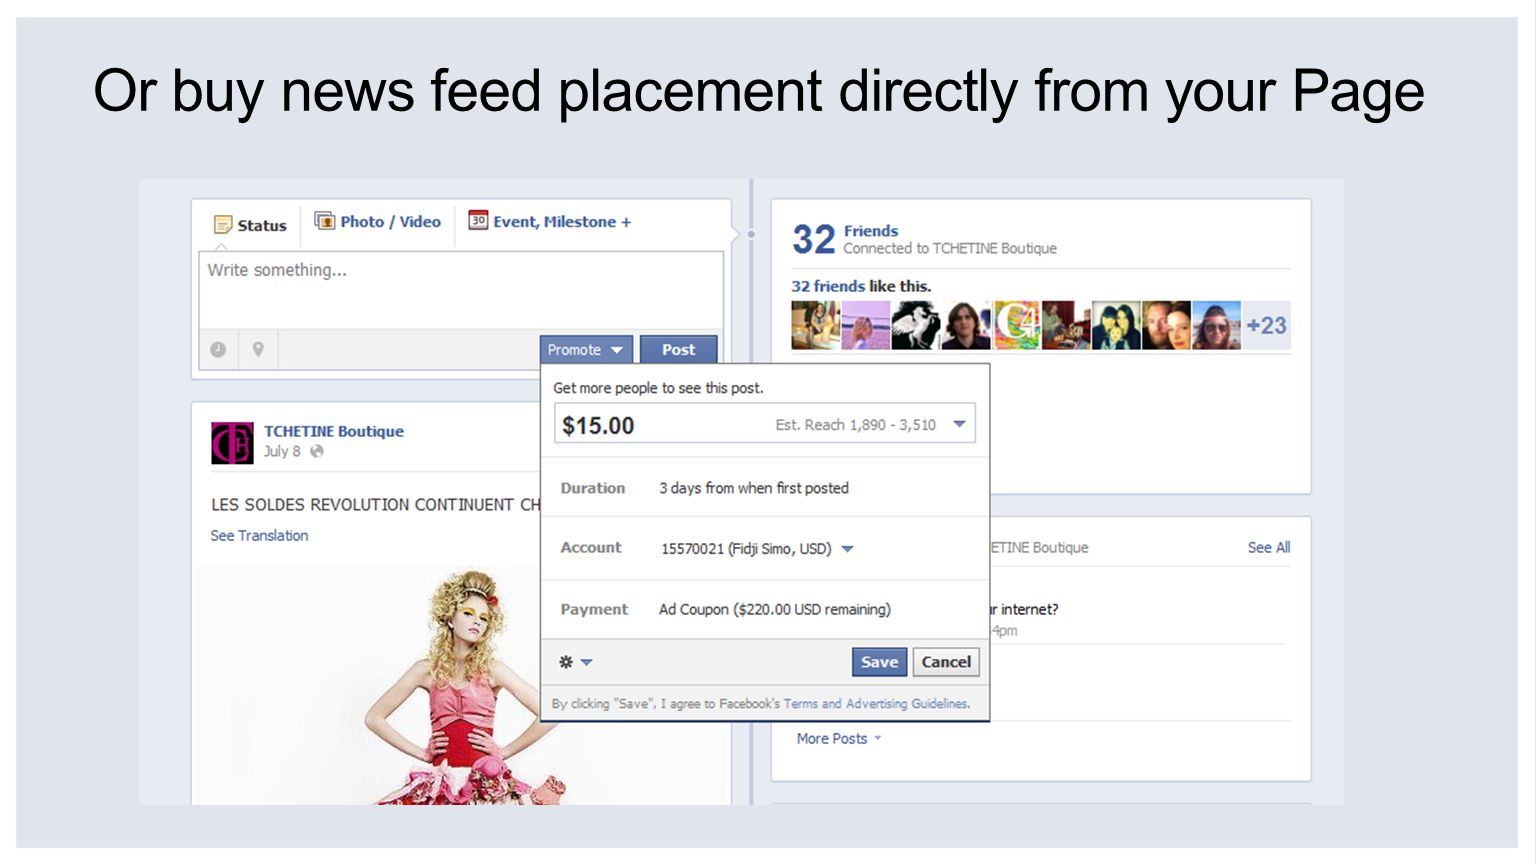 Or buy news feed placement directly from your Page